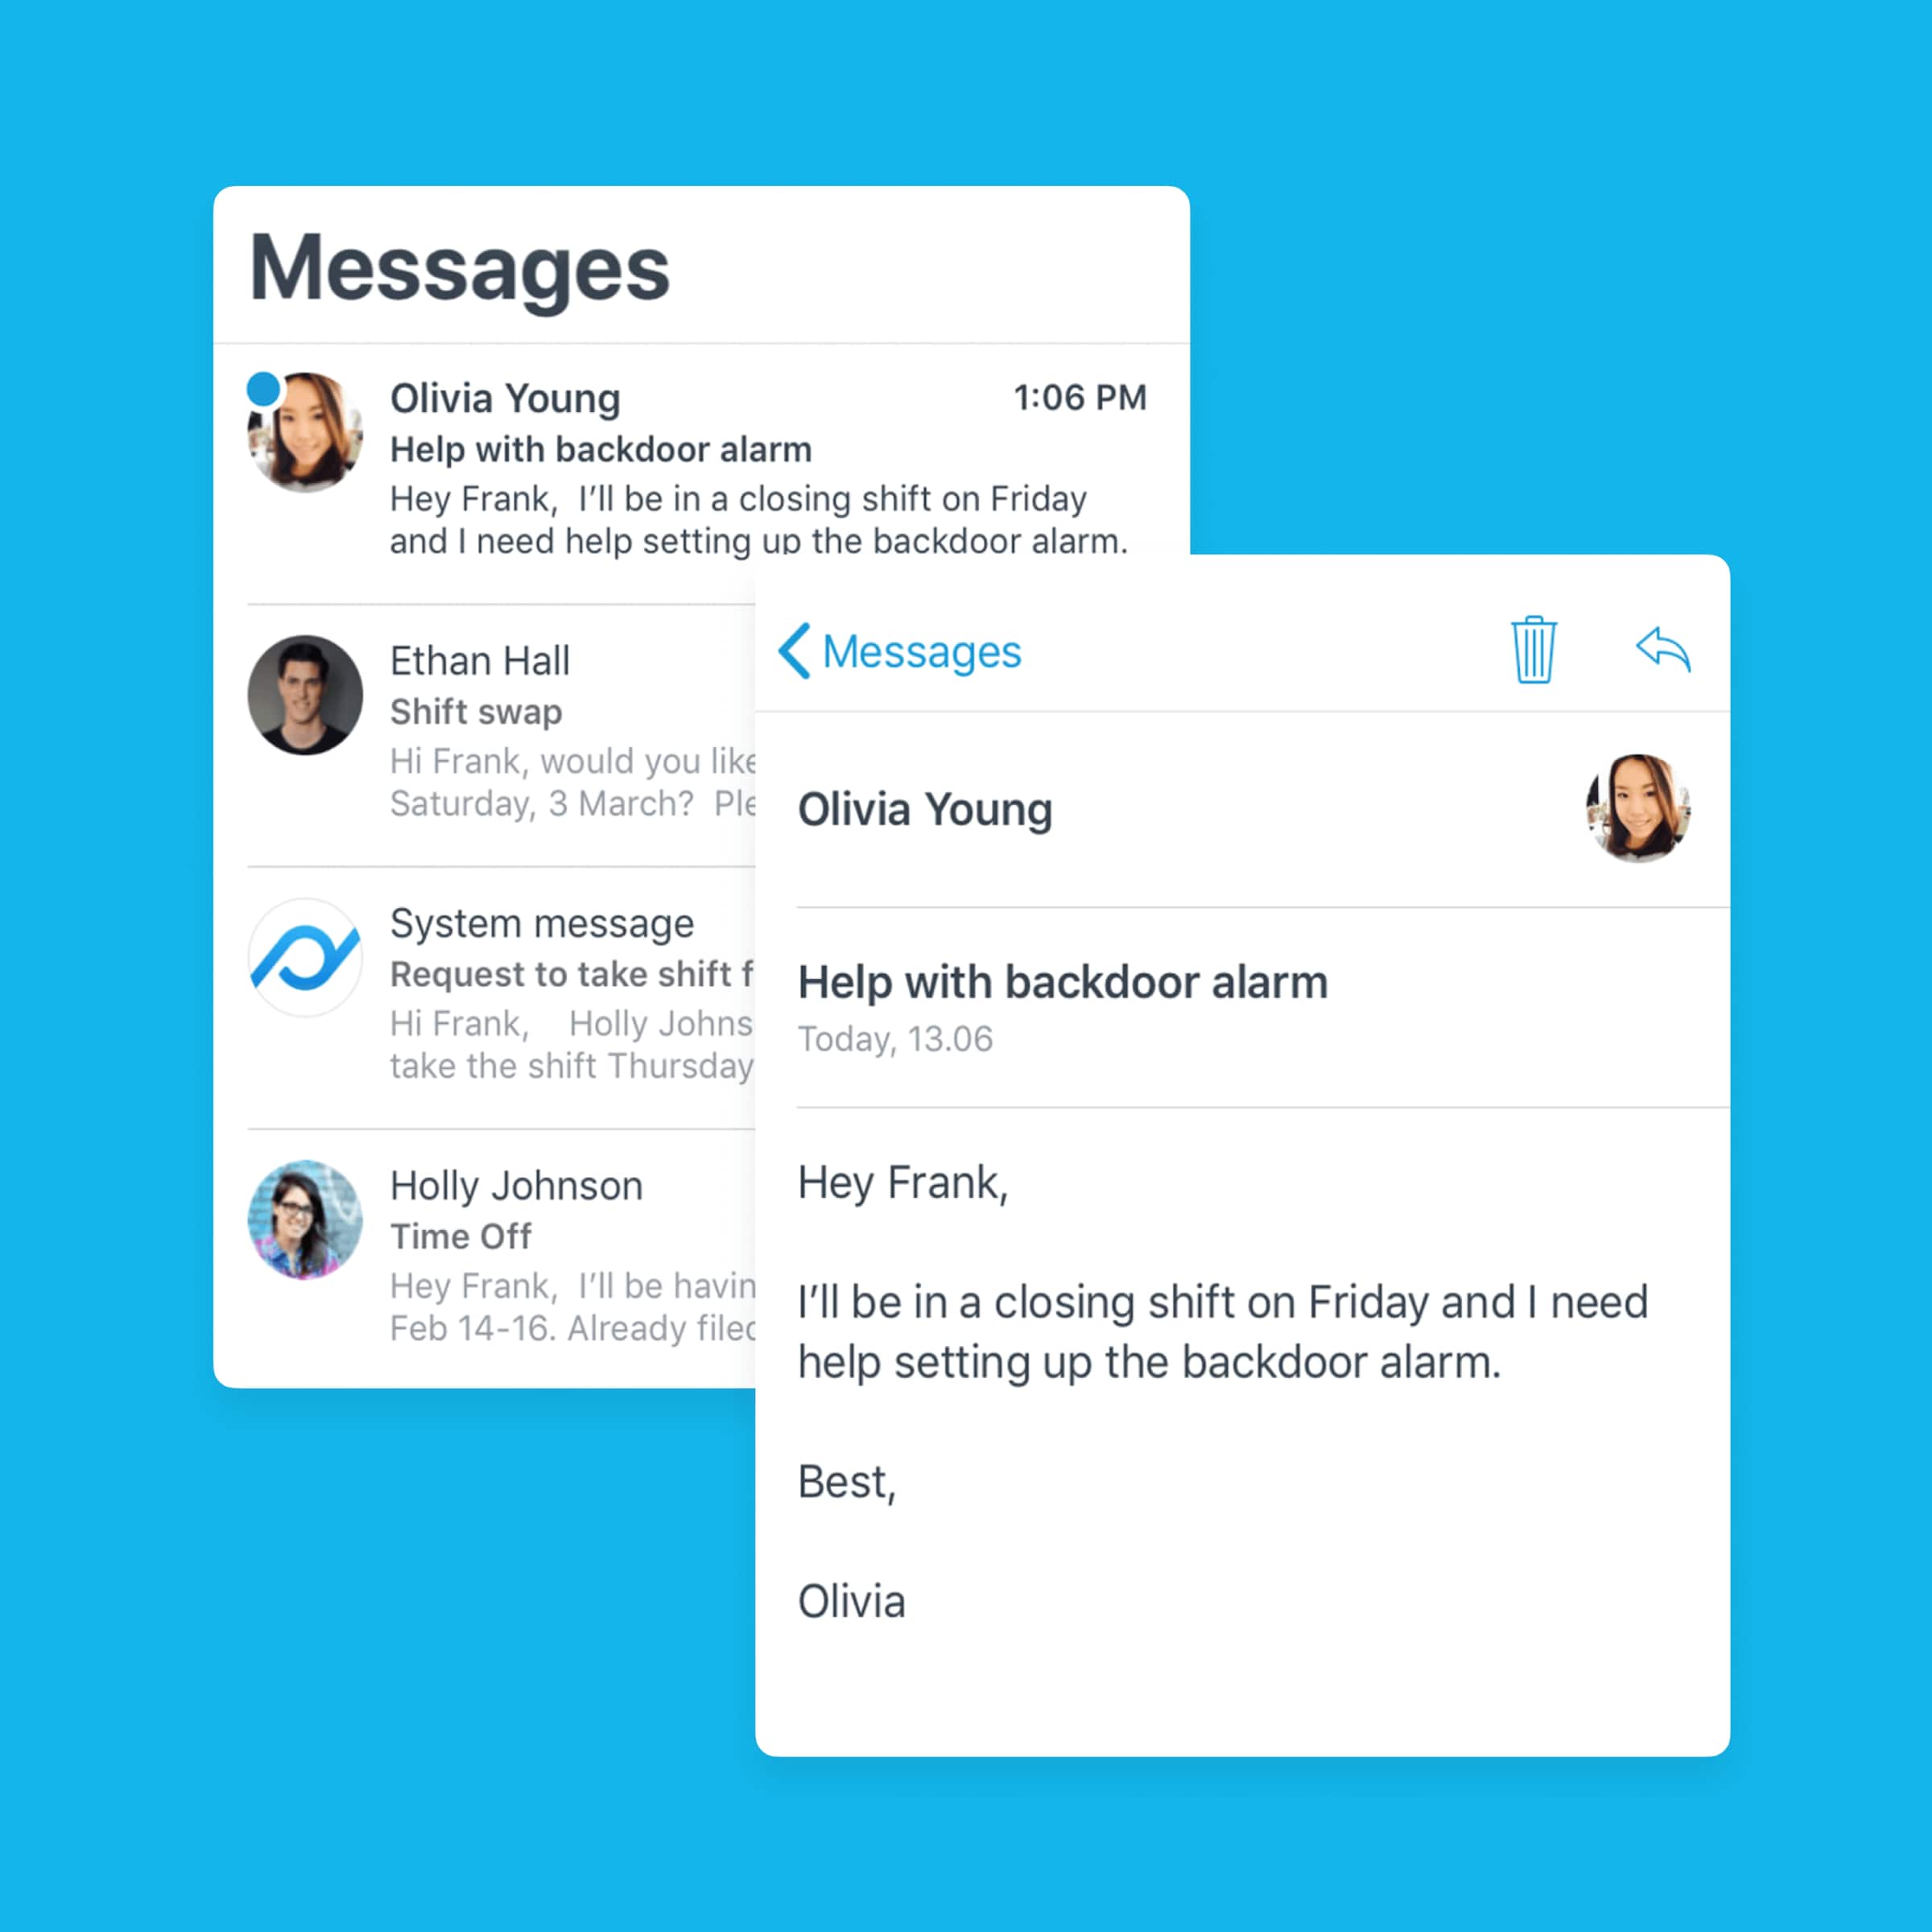 Messages between employees on workforce management system Planday from Xero.